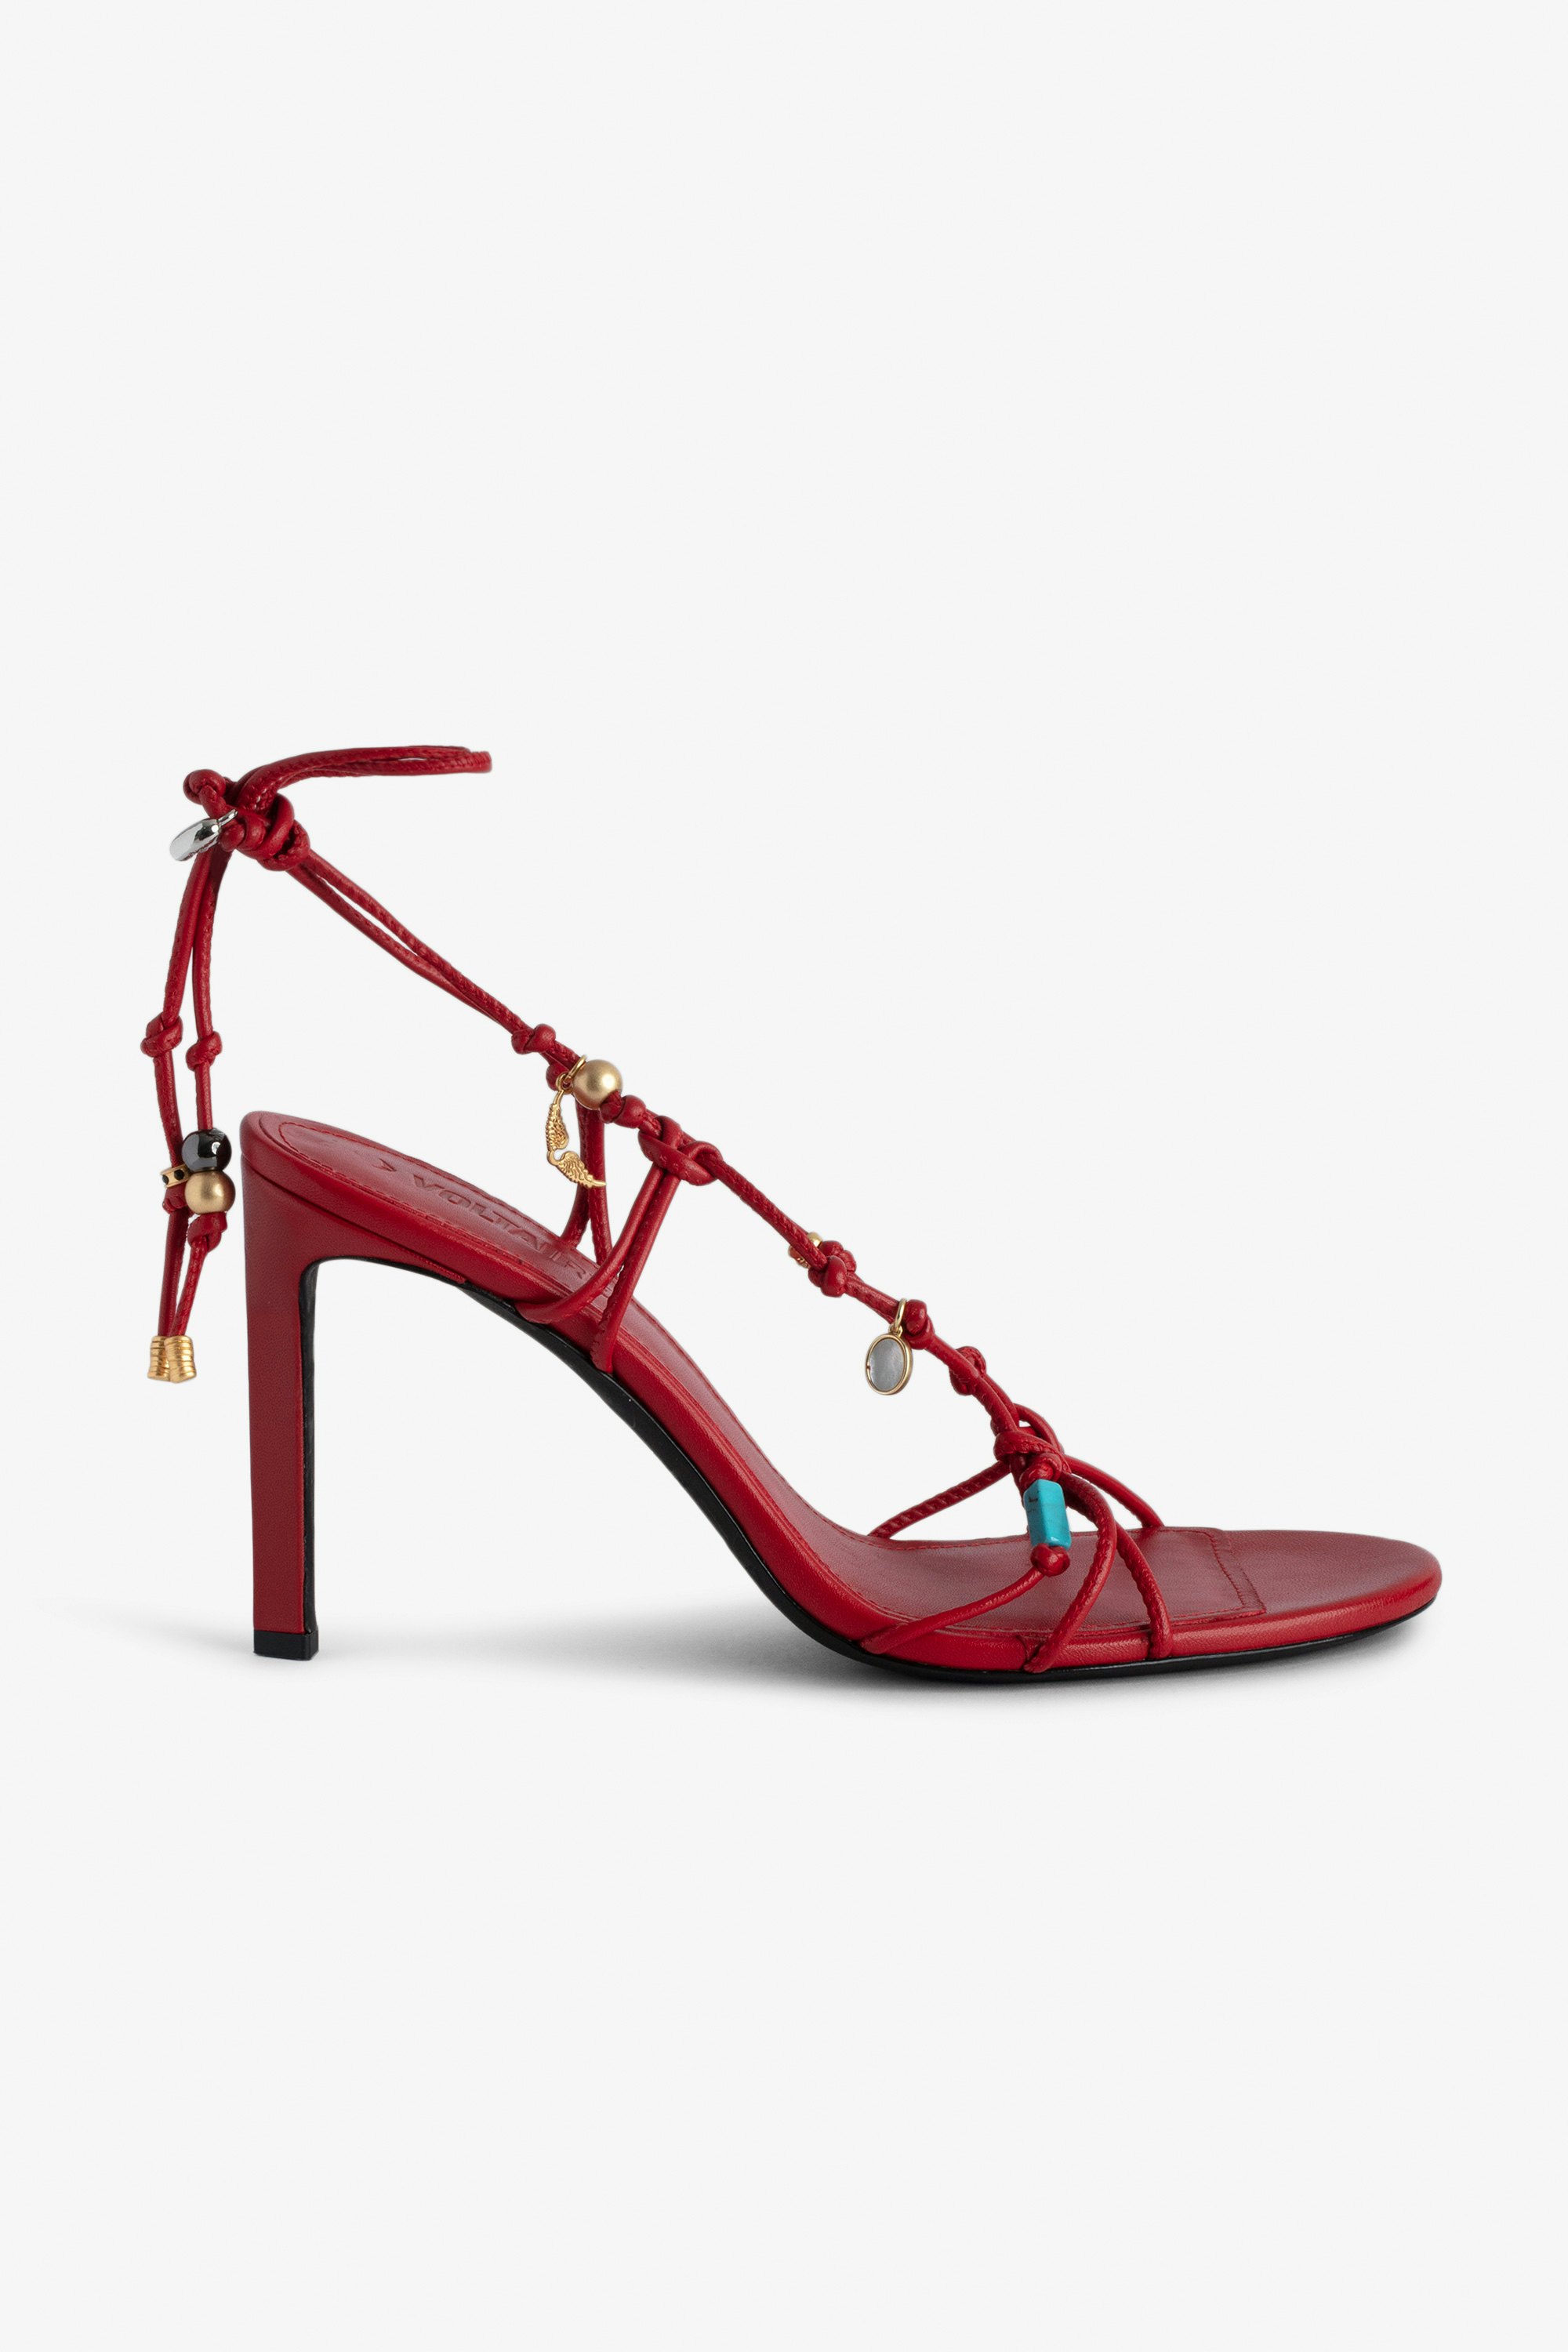 Alana Sandals - Red smooth leather heeled sandals with tied straps and charms.